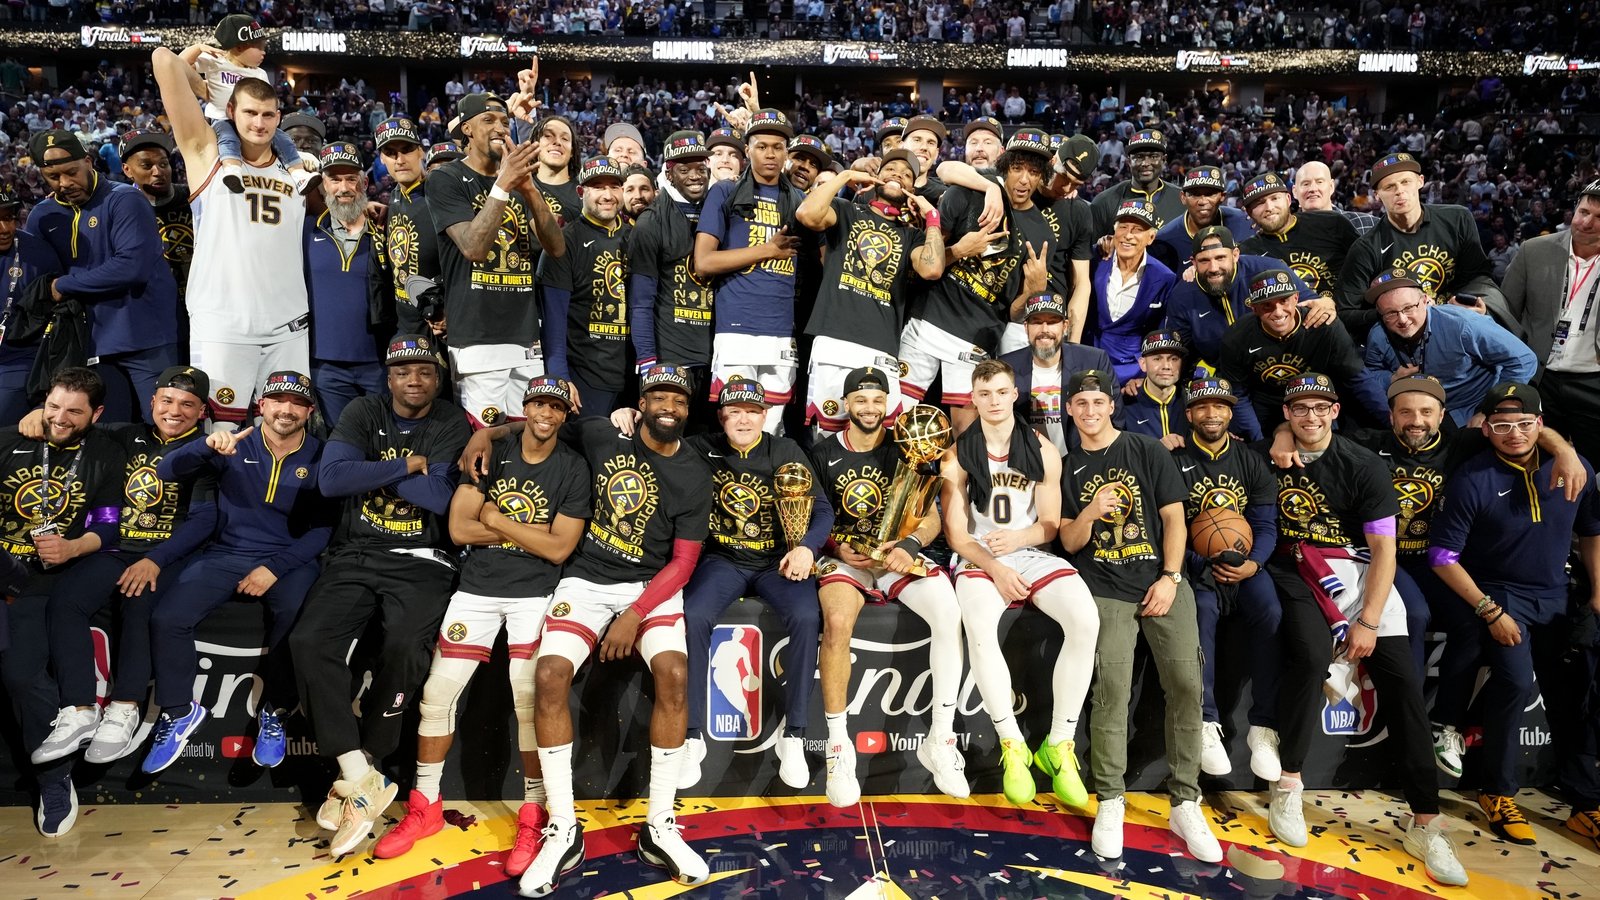 Denver Nuggets win first ever NBA championship